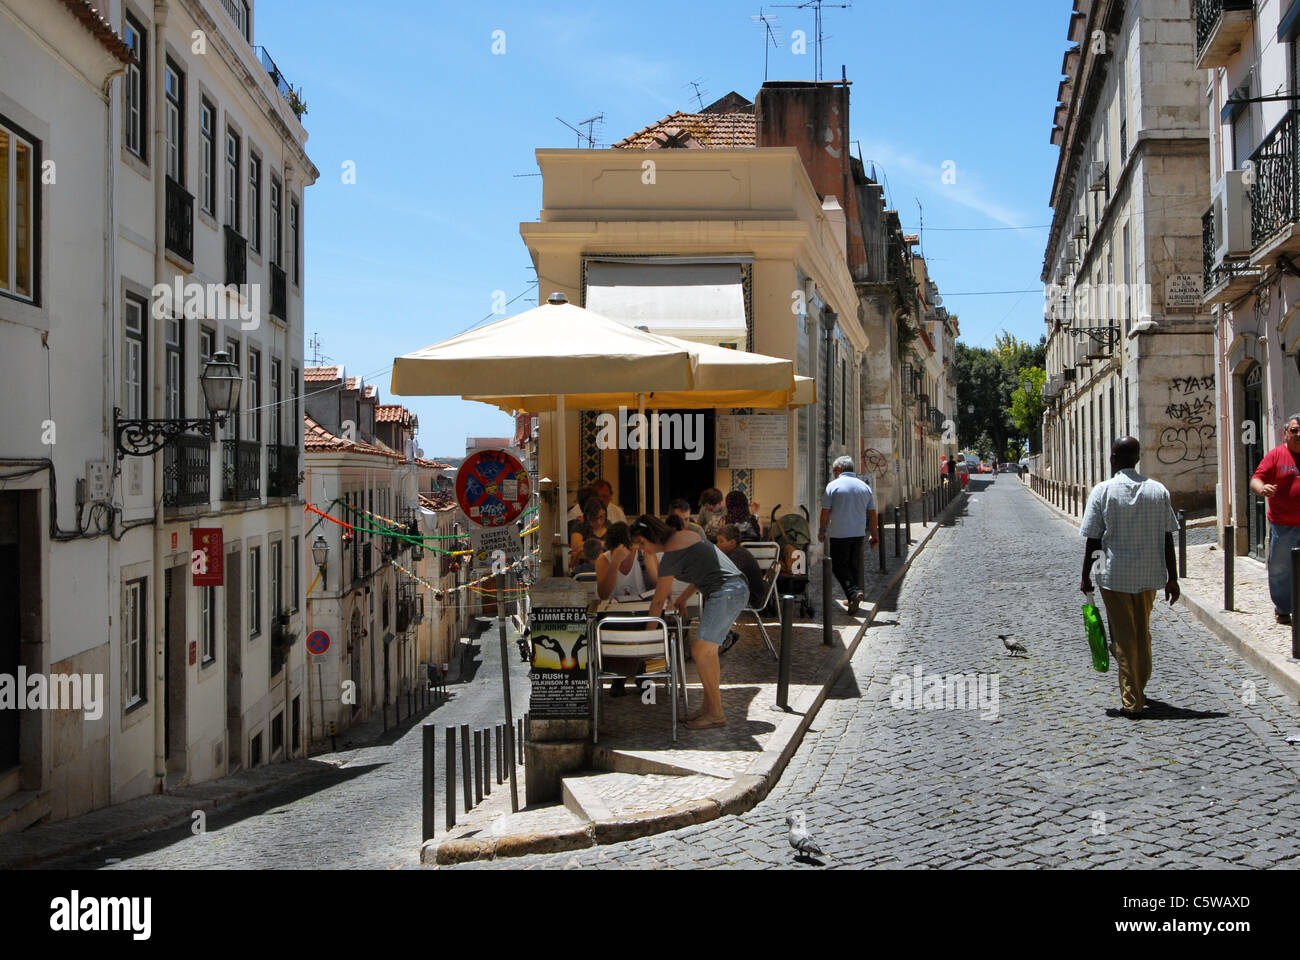 A small cafe on a cobbled street in the Bairro Alto  district of  Lisbon Portugal. Stock Photo